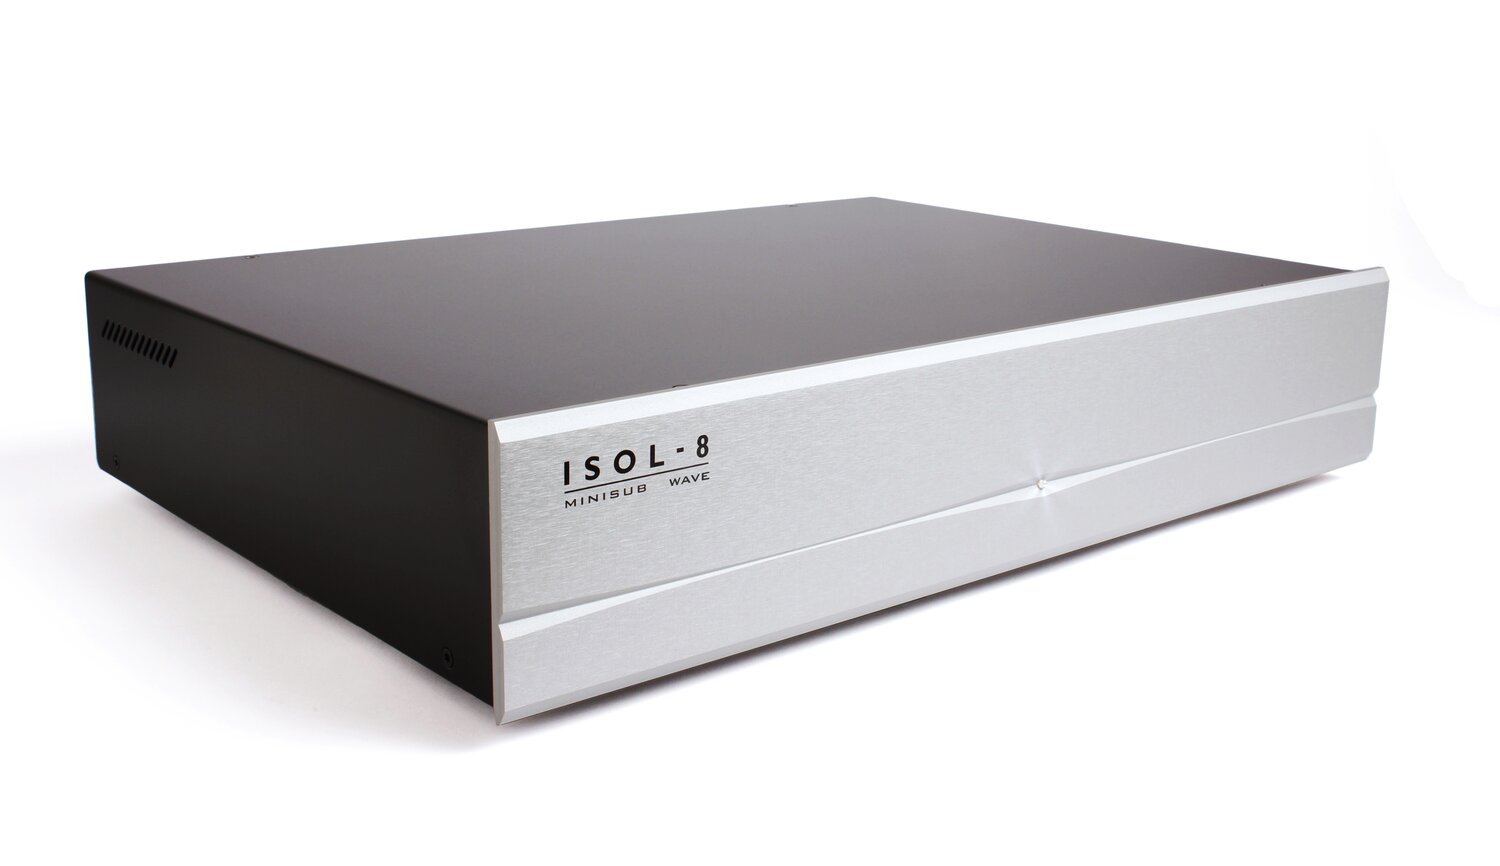 ISOL-8 MiniSub Wave (silver or black front).